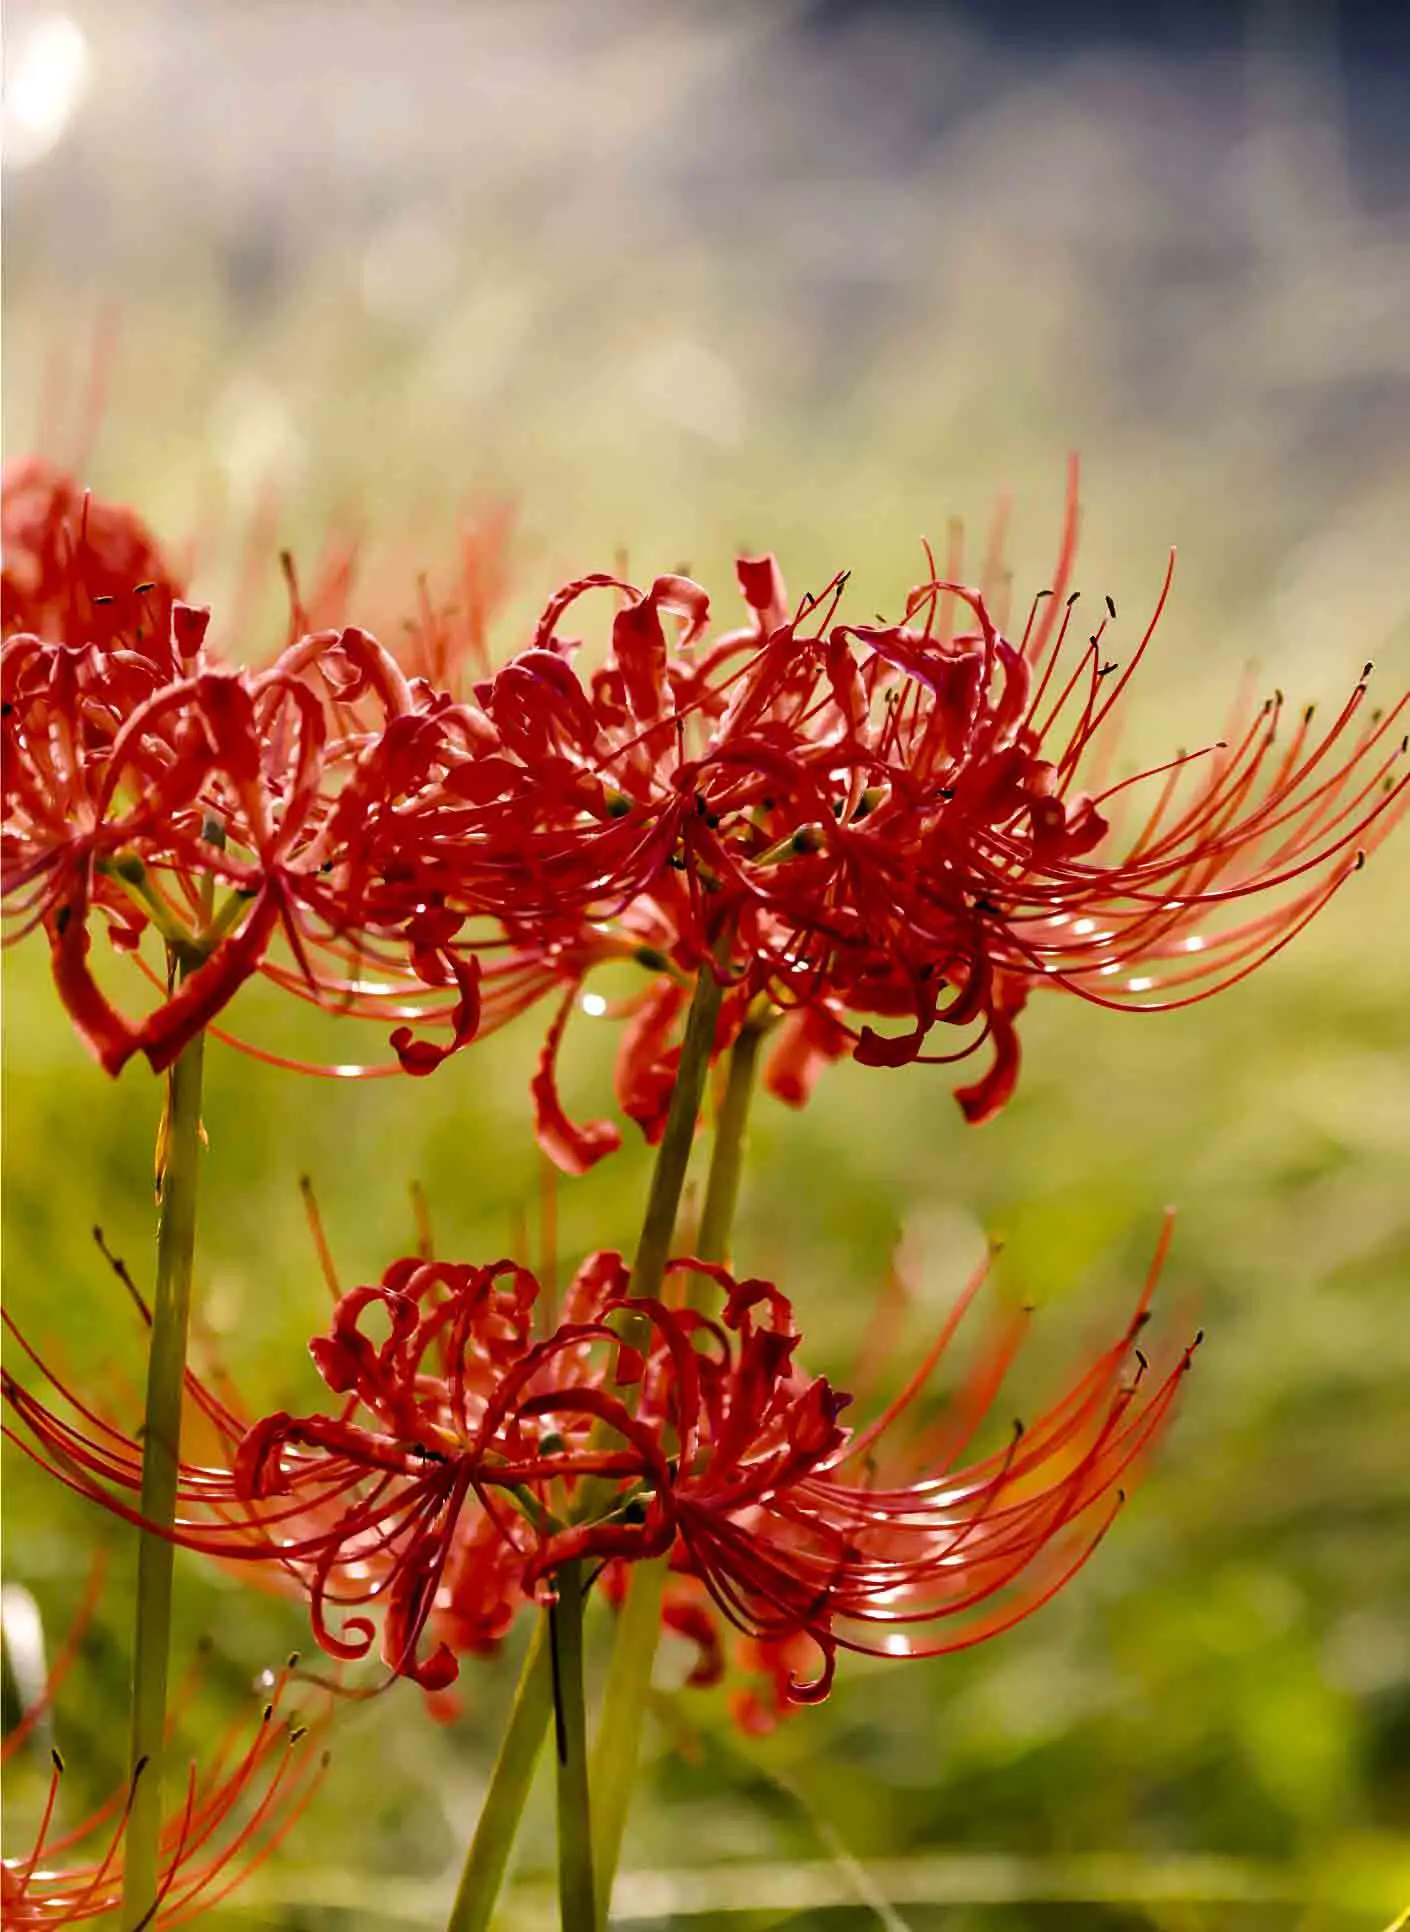 Red spider lily flowers